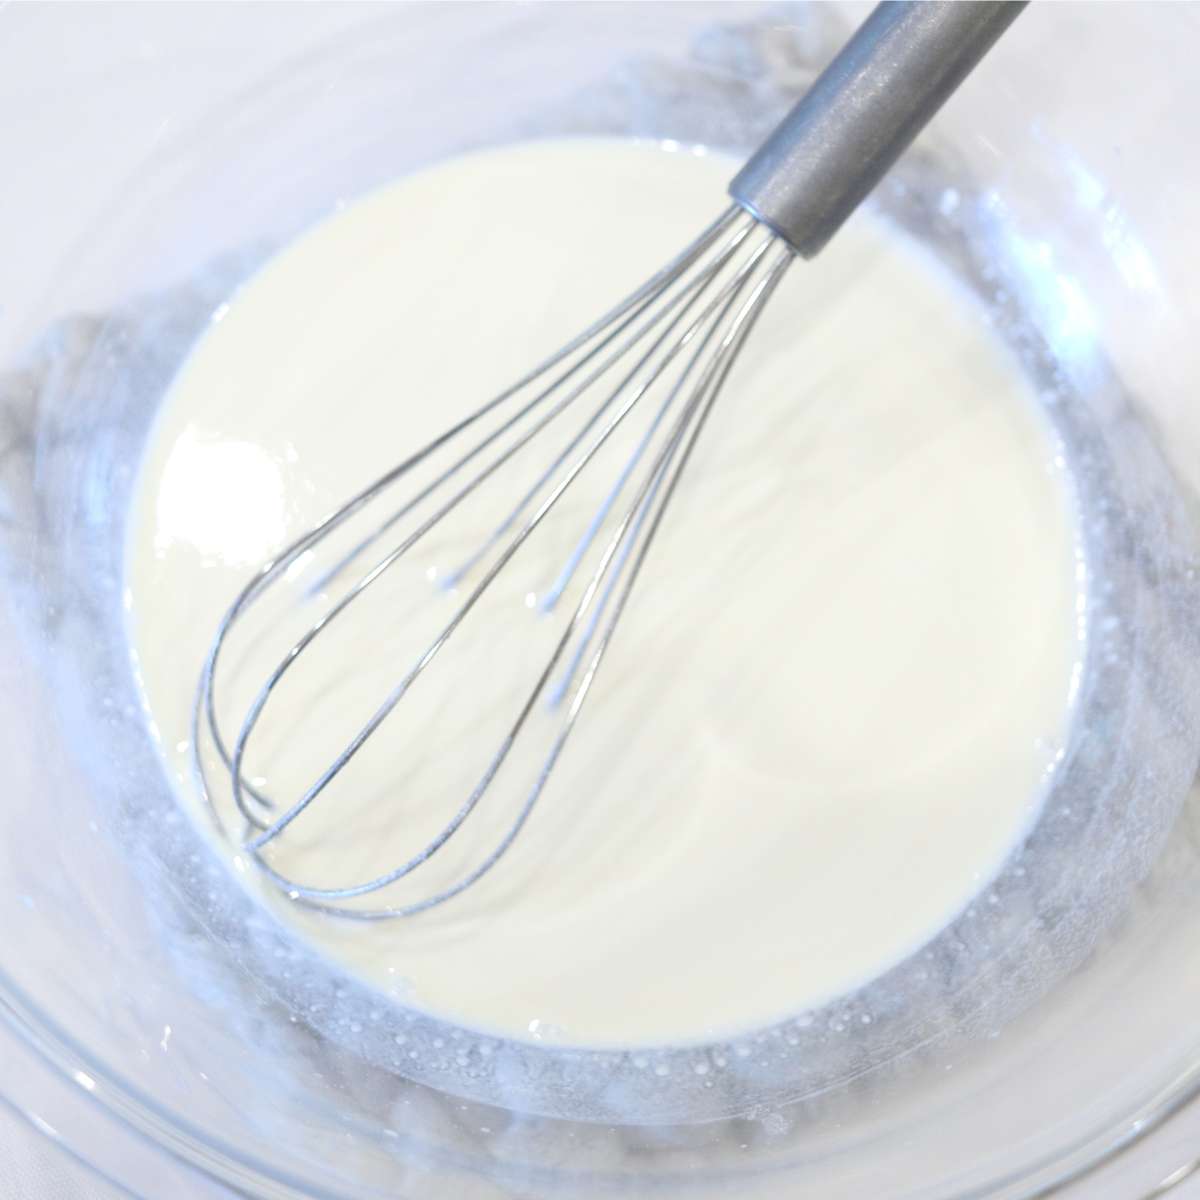 A silver whisk sitting in a clear bowl full of white liquid. The liquid are ingredients being used to make waterproof sunscreen bars that are safe to use on acne prone skin.